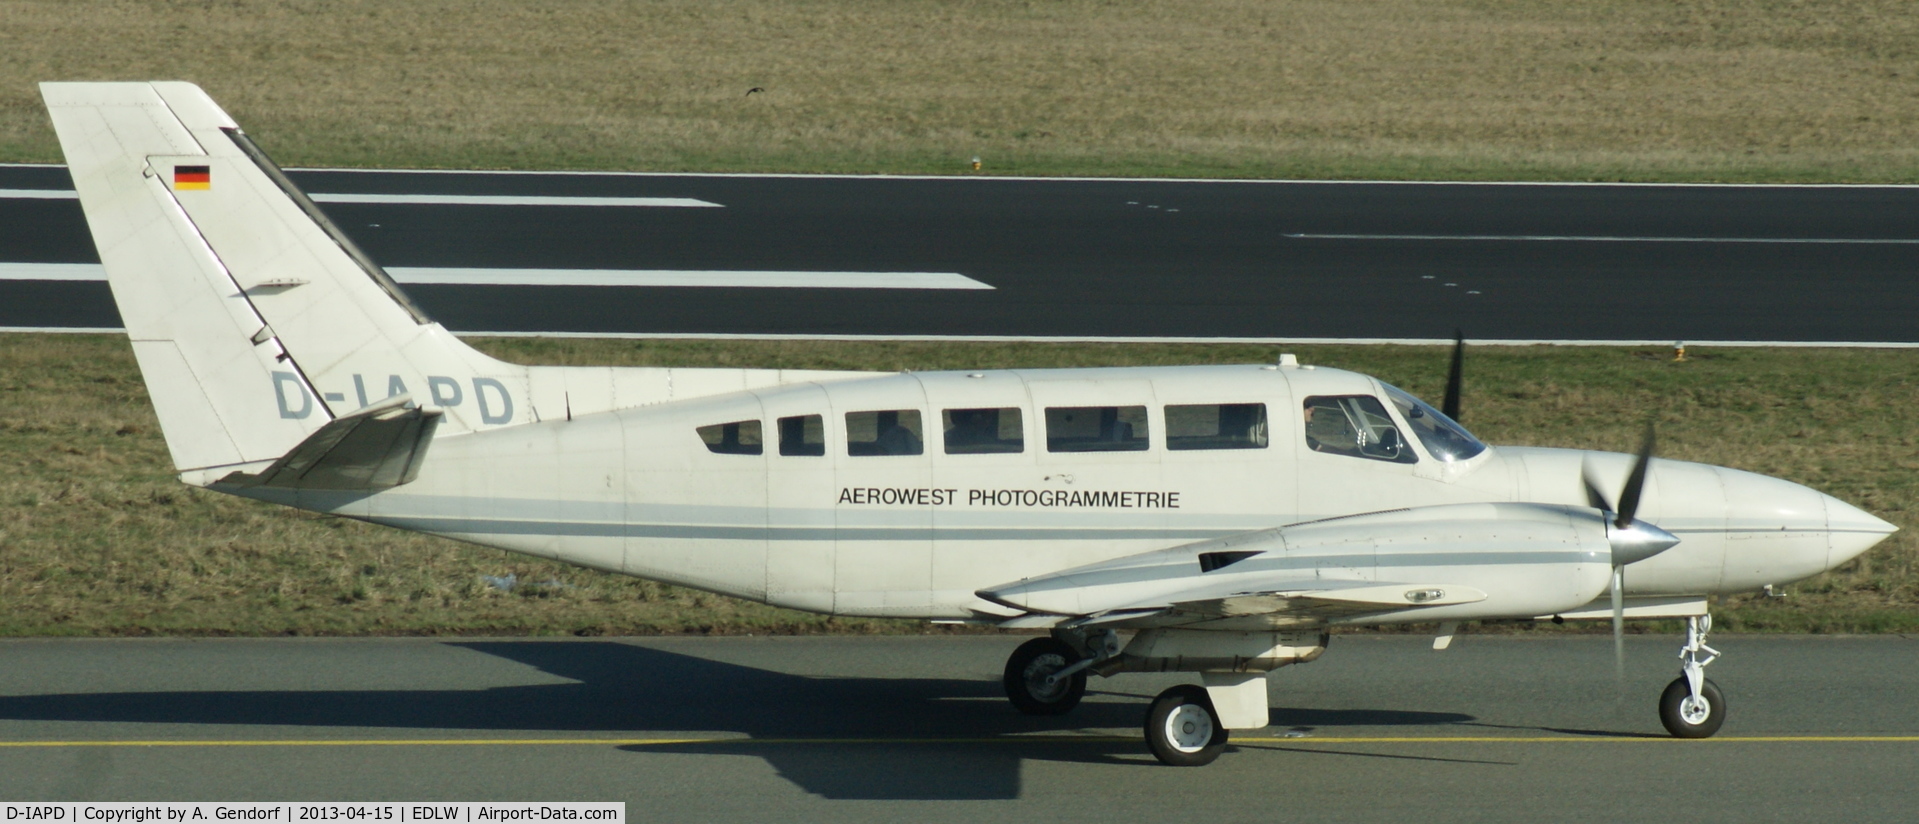 D-IAPD, Cessna 404 Titan C/N 404-0679, Aerowest Photogrammetrie, is taxiing to the RWY24 at Dortmund (EDLW)